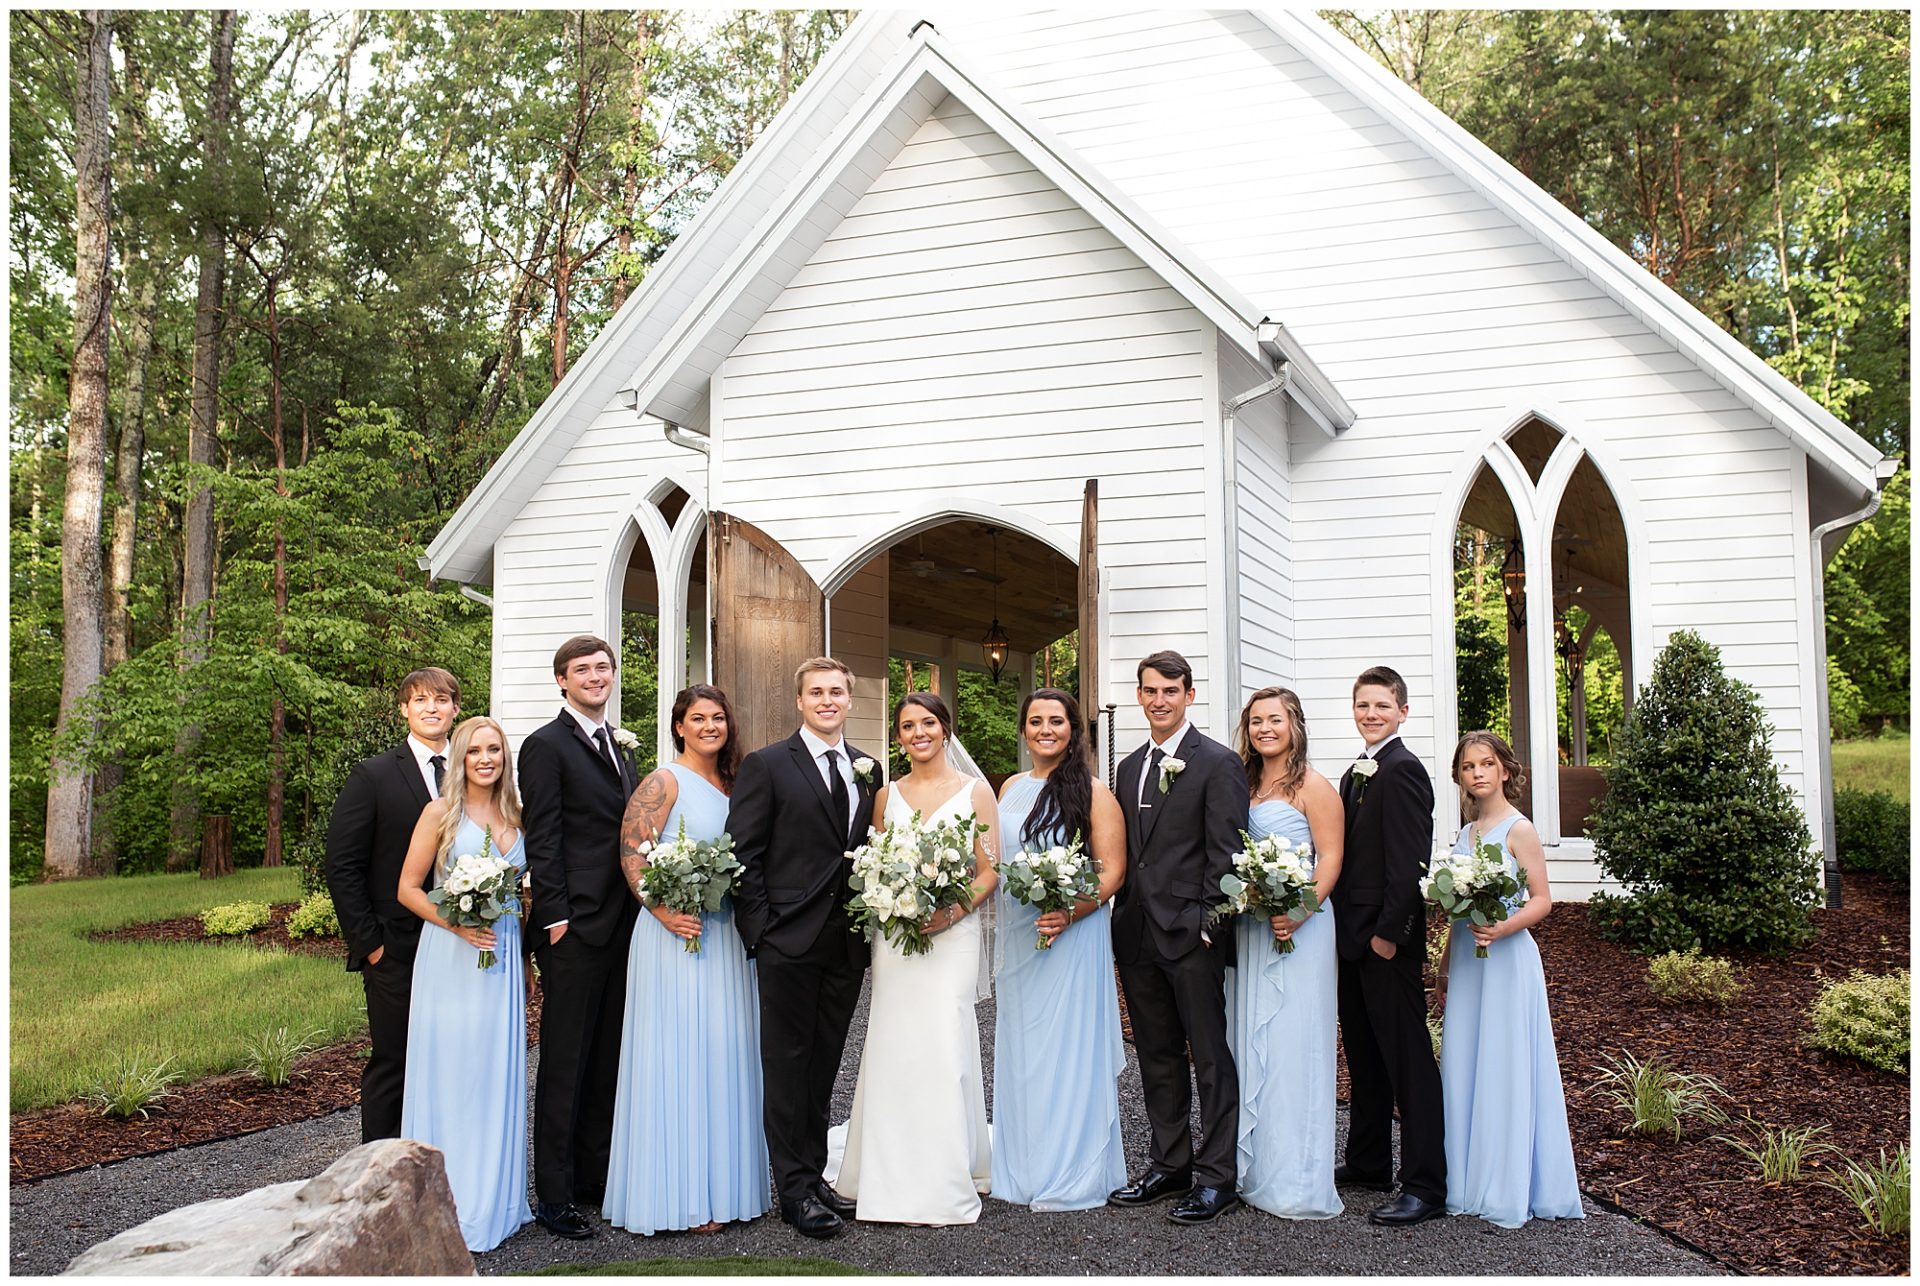 Chapel in the woods, firefly lane wedding, nashville wedding, open air chapel, wedding party, sky blue bridesmaid dresses